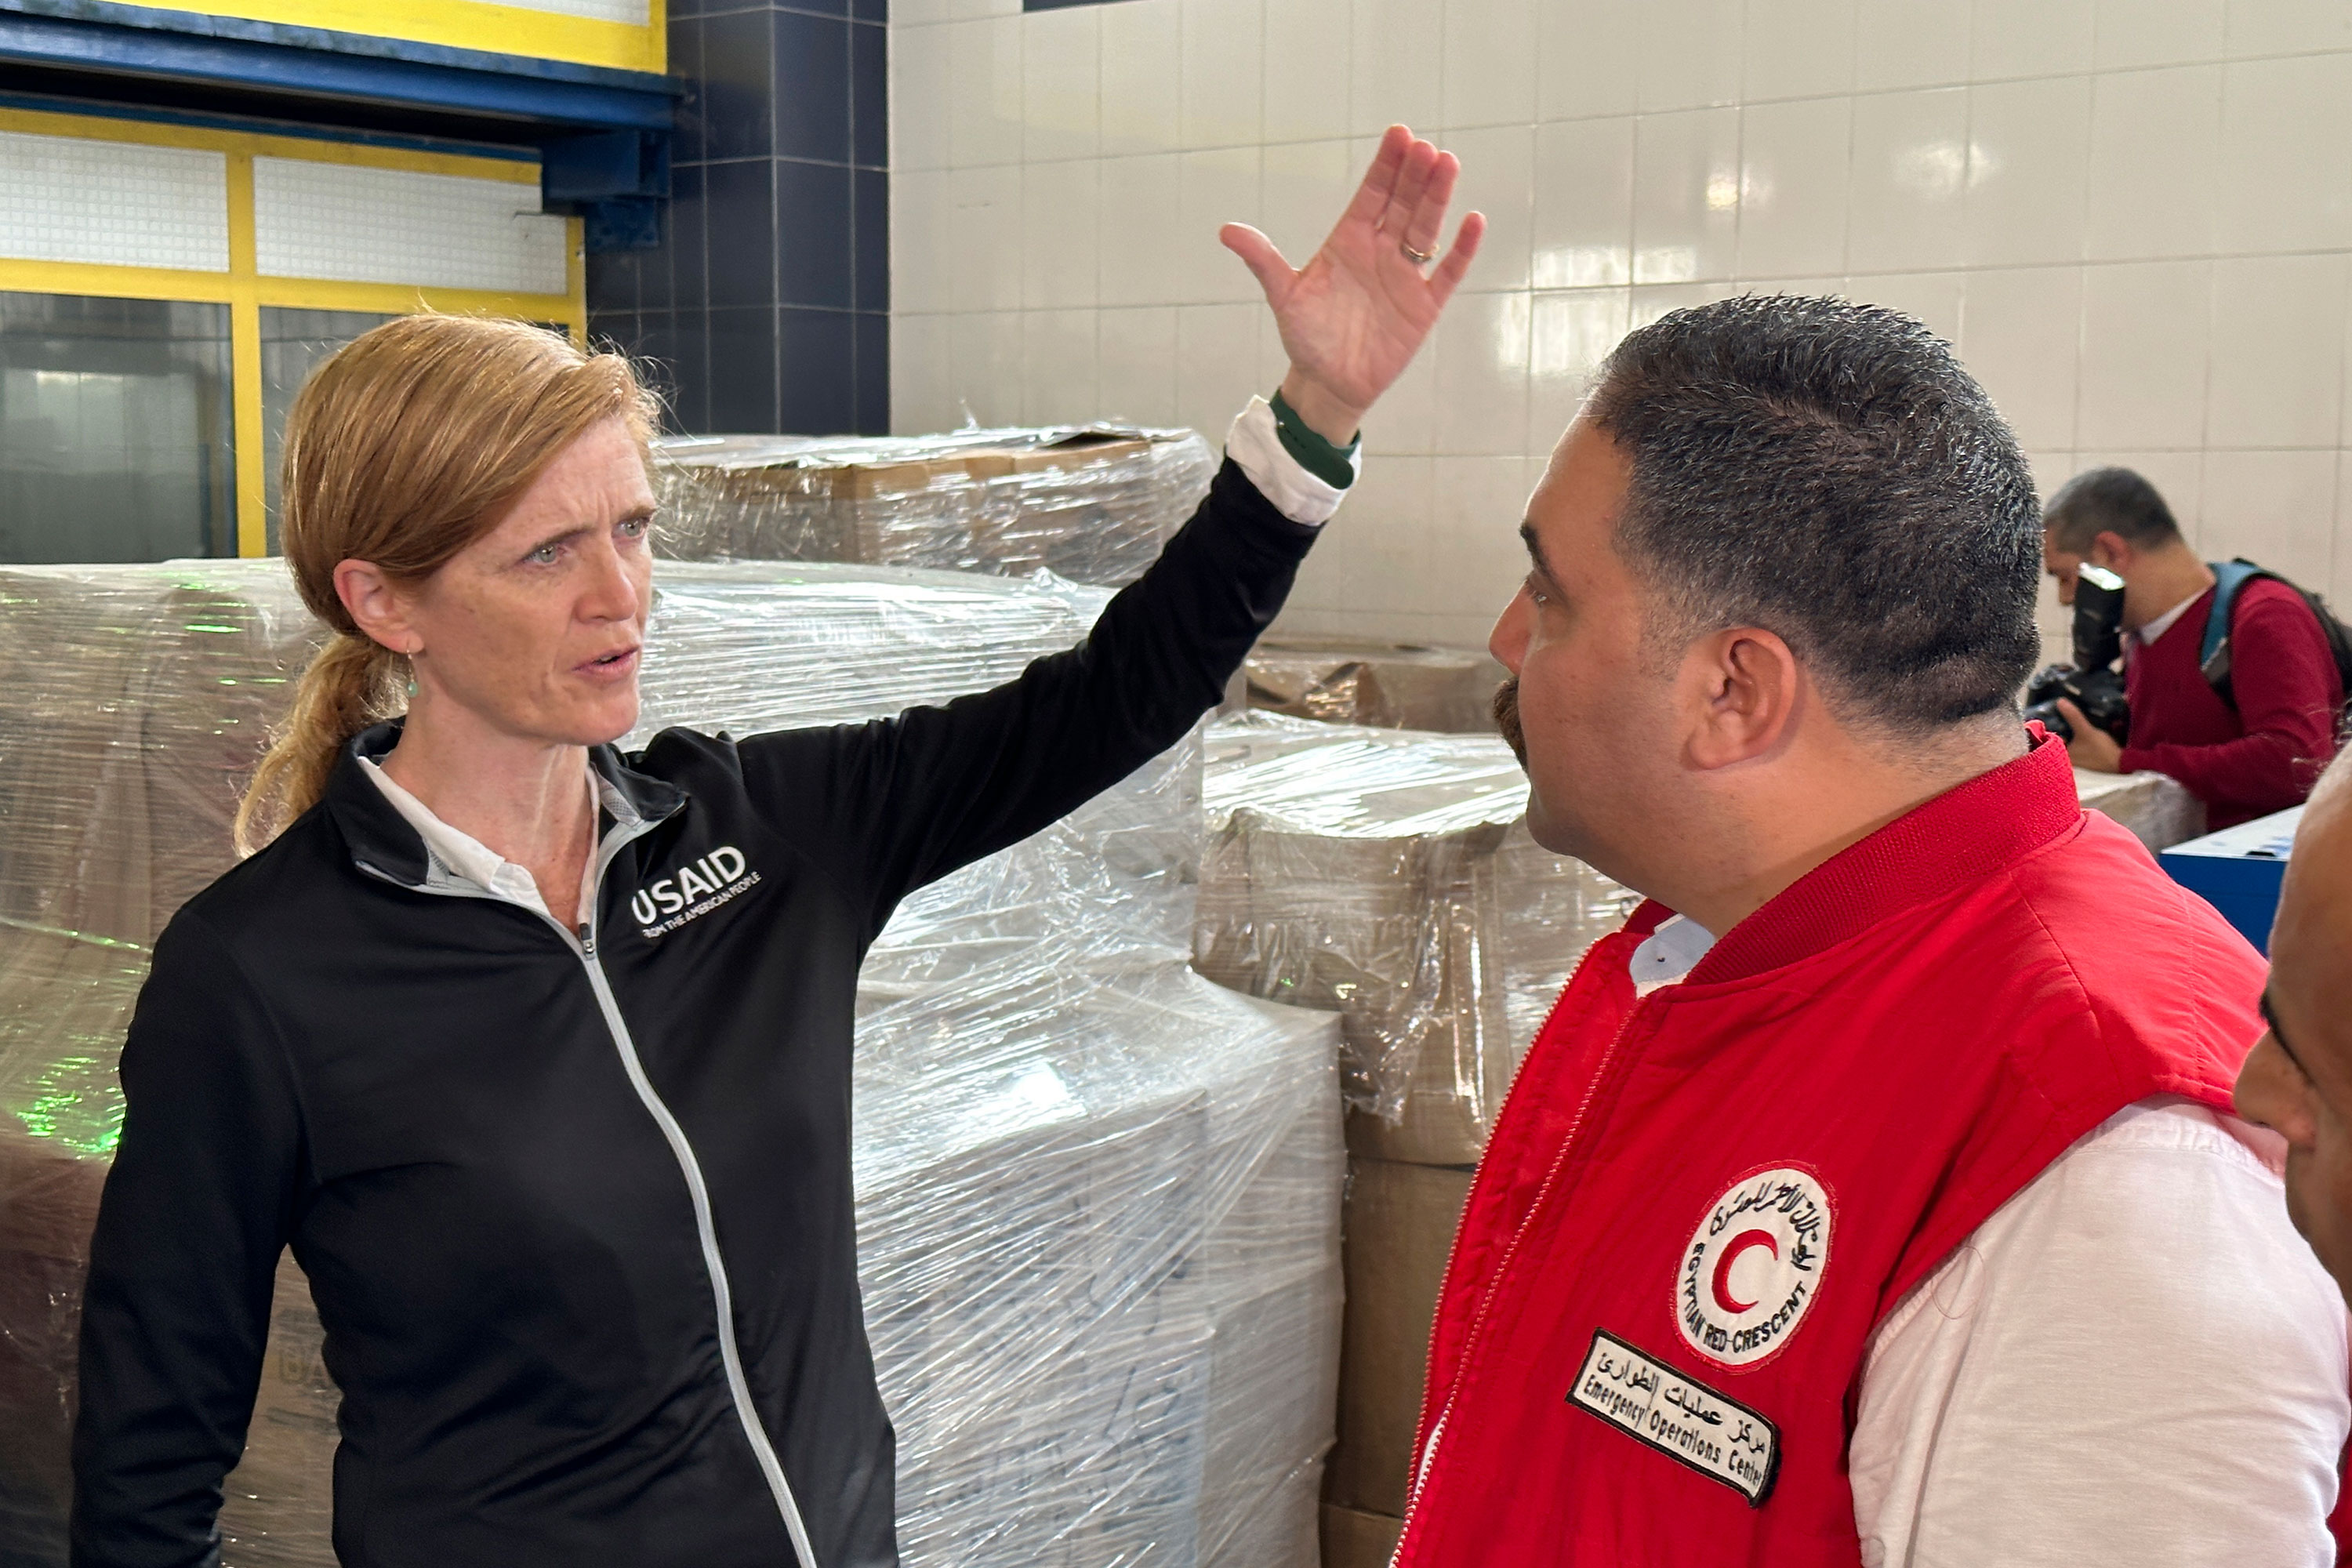 US Aid Administrator Samantha Power speaks to an Egyptian Red Crescent official as she arrives at the international humanitarian assistance hub in Al-Arish, Egypt, on Tuesday.